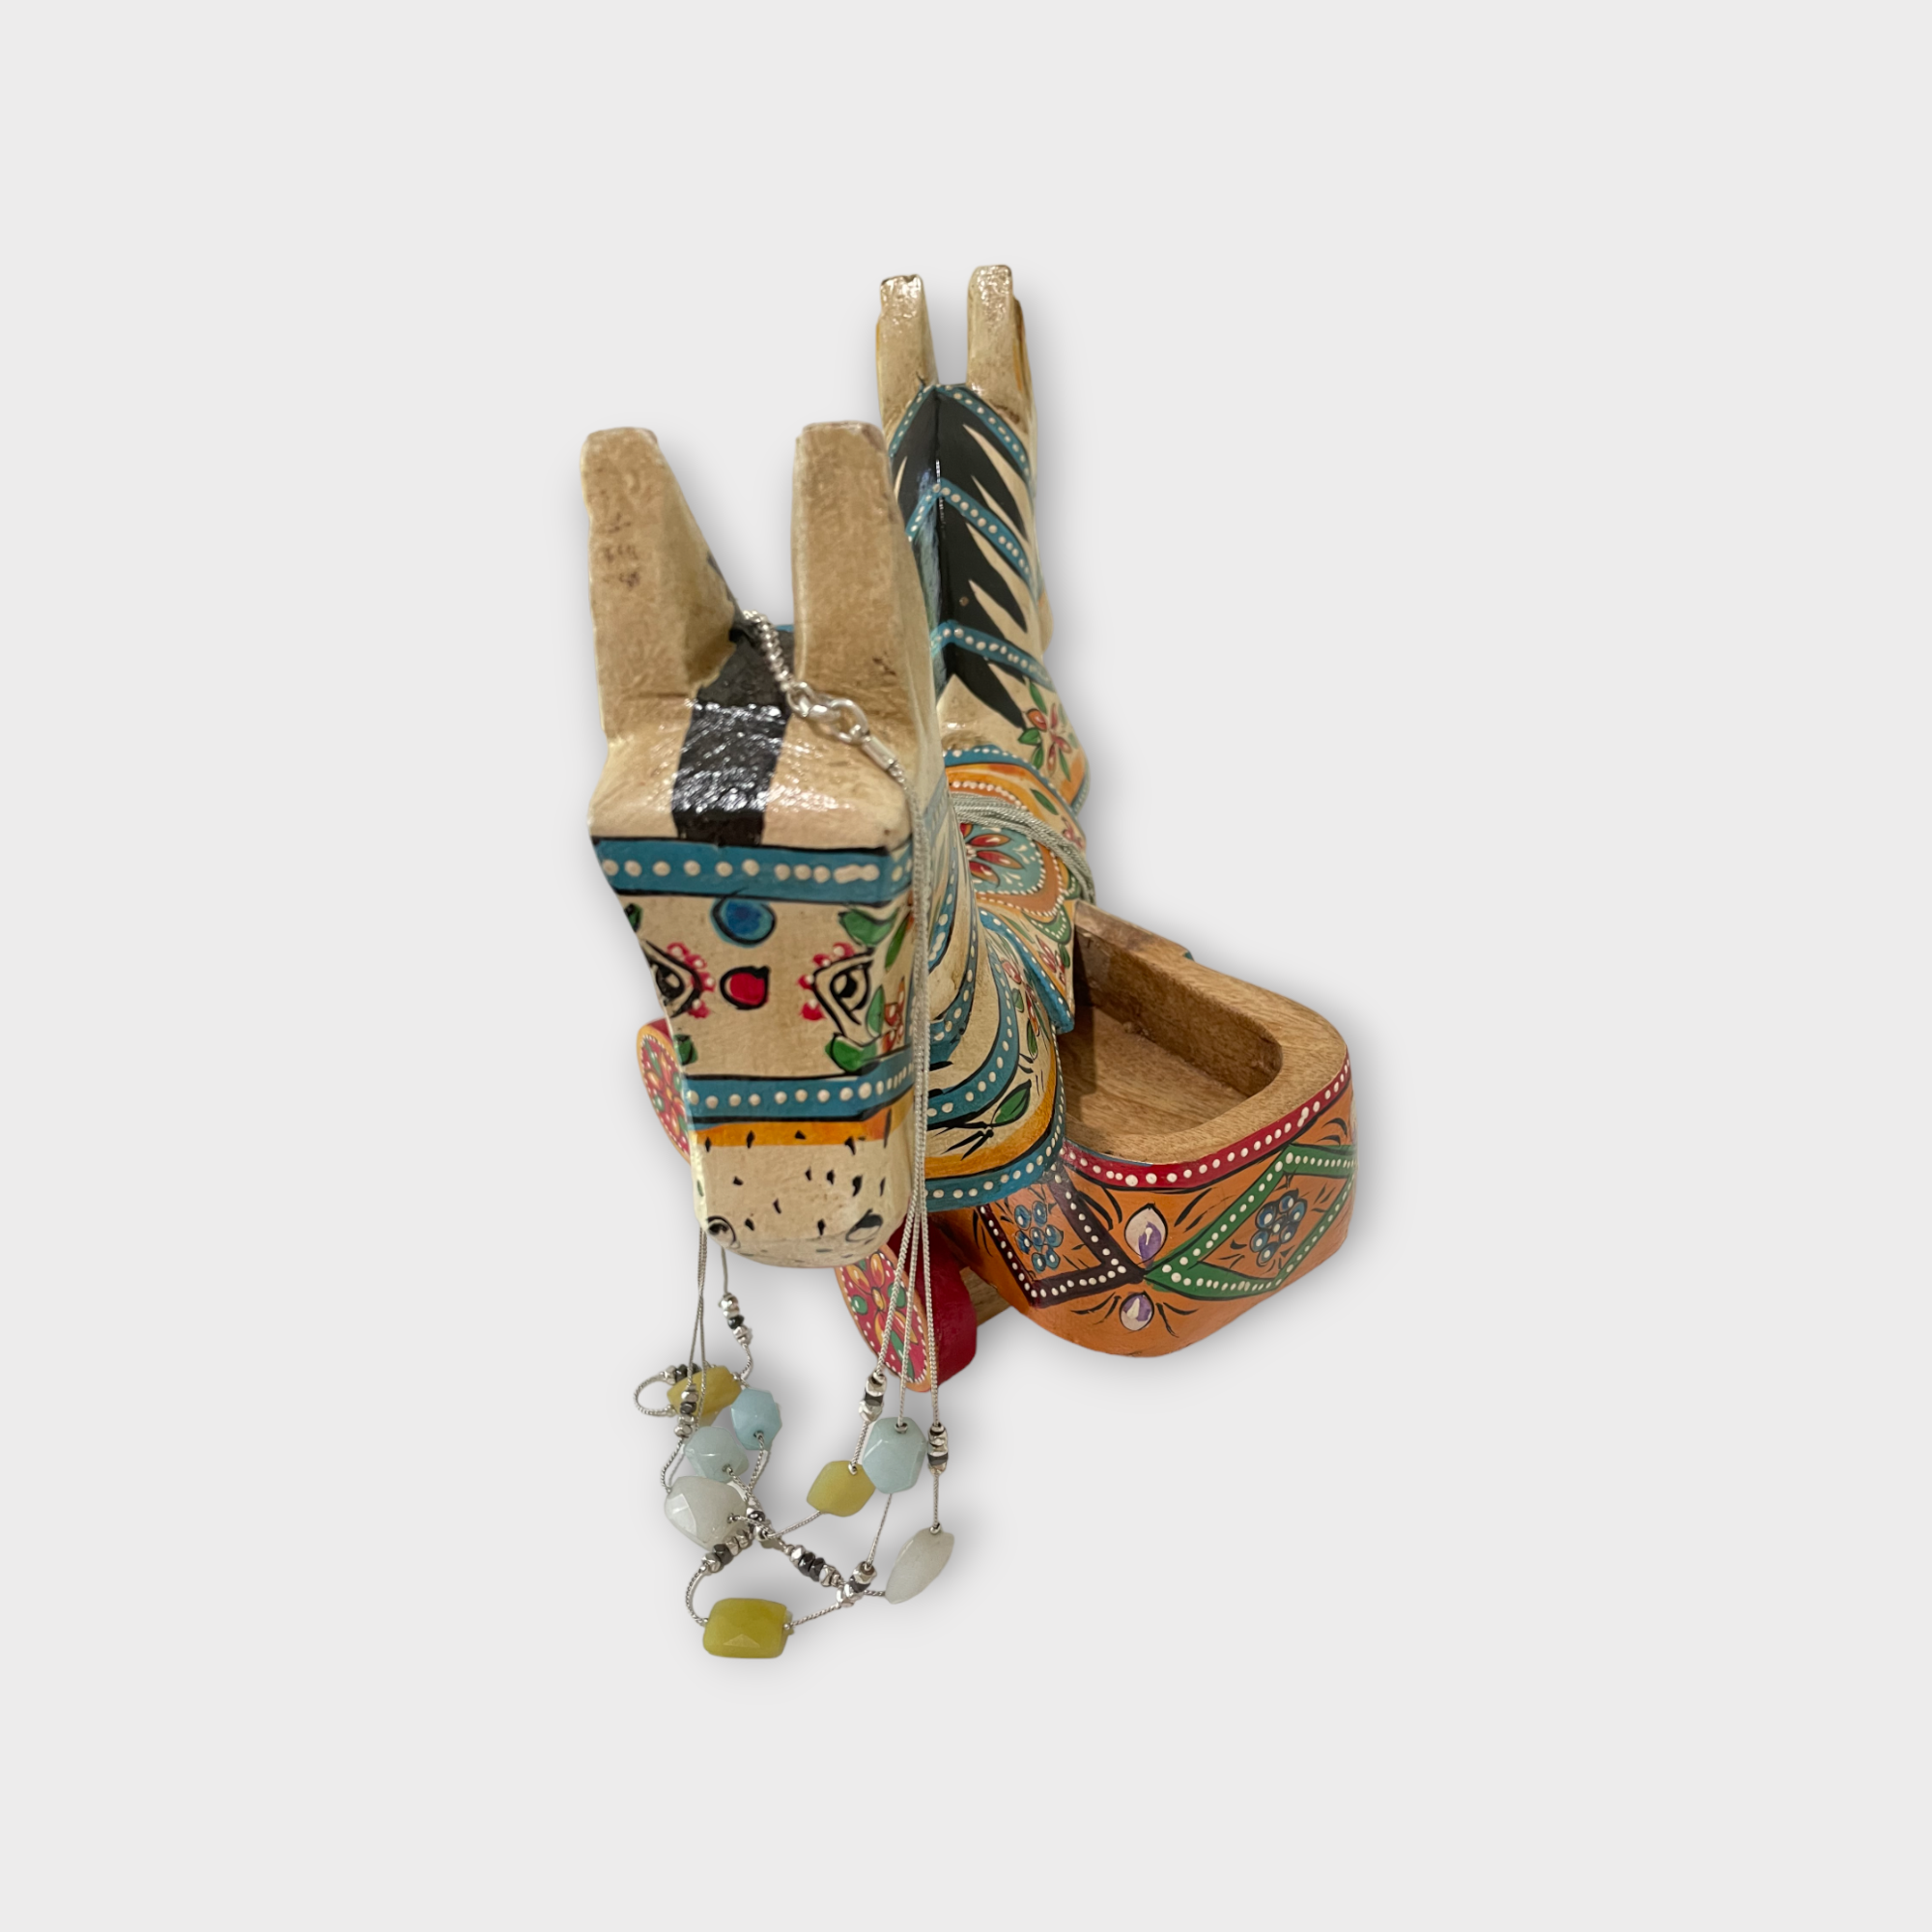 Wooden Horse Jewelry Box from India